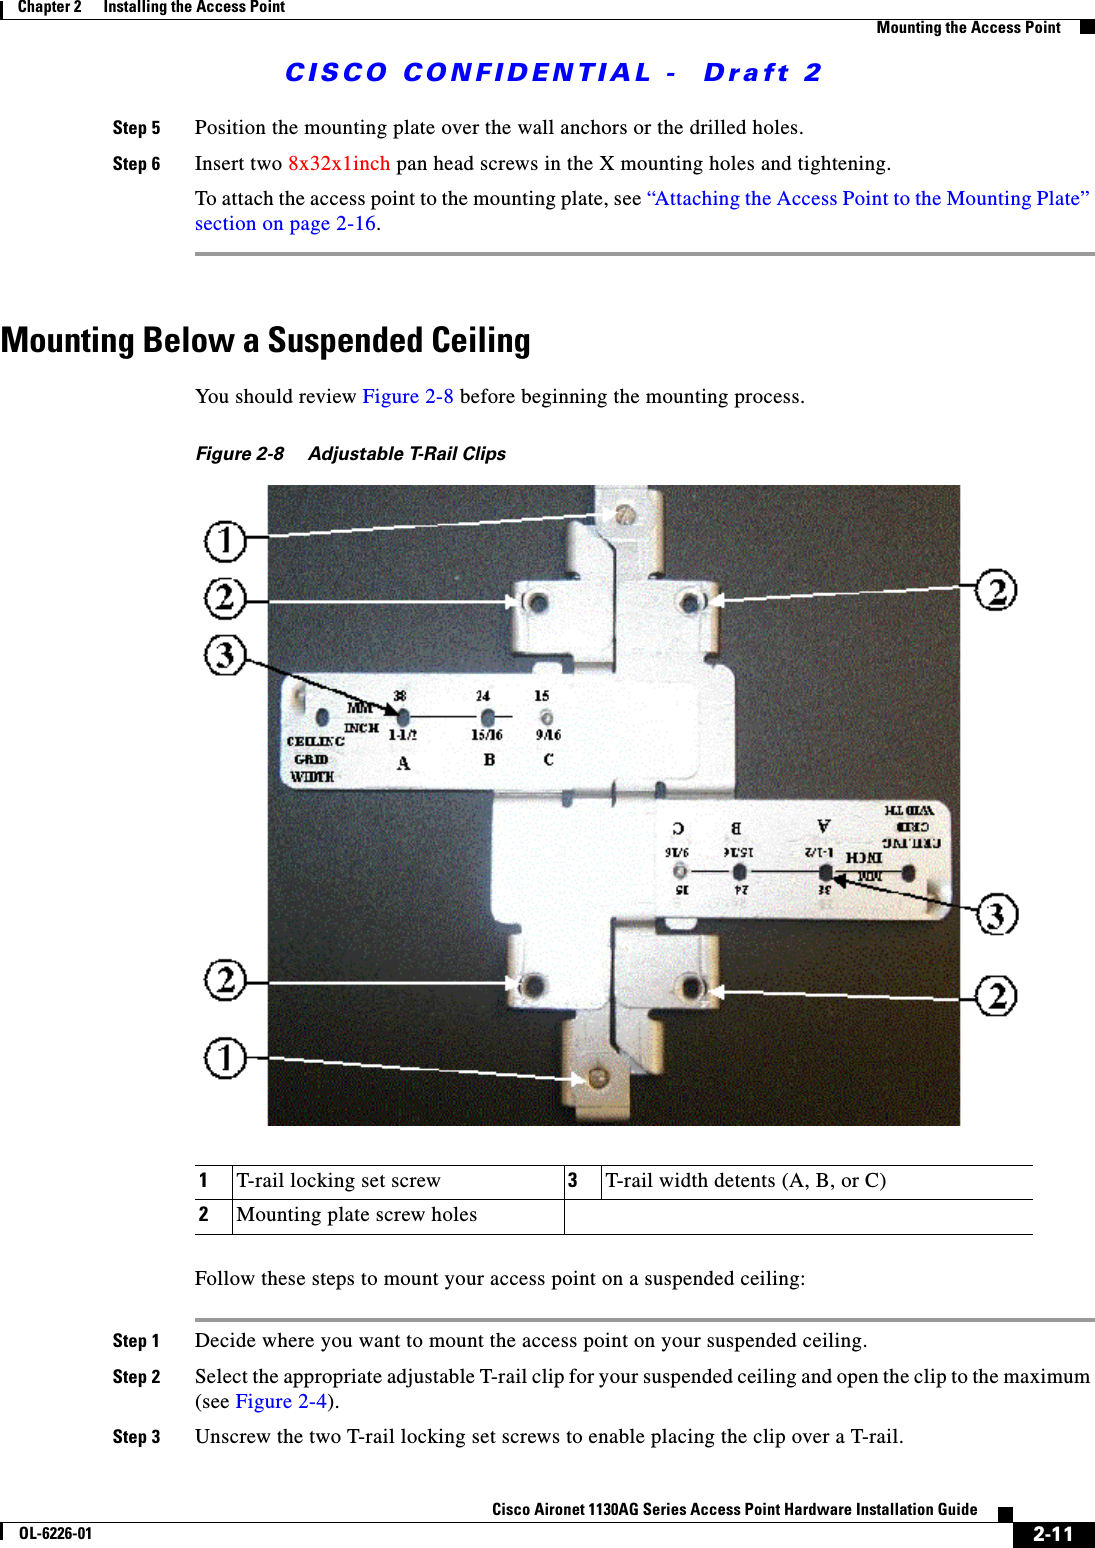  CISCO CONFIDENTIAL -  Draft 22-11Cisco Aironet 1130AG Series Access Point Hardware Installation GuideOL-6226-01Chapter 2      Installing the Access PointMounting the Access PointStep 5 Position the mounting plate over the wall anchors or the drilled holes.Step 6 Insert two 8x32x1inch pan head screws in the X mounting holes and tightening.To attach the access point to the mounting plate, see “Attaching the Access Point to the Mounting Plate” section on page 2-16.Mounting Below a Suspended Ceiling You should review Figure 2-8 before beginning the mounting process.Figure 2-8 Adjustable T-Rail ClipsFollow these steps to mount your access point on a suspended ceiling:Step 1 Decide where you want to mount the access point on your suspended ceiling.Step 2 Select the appropriate adjustable T-rail clip for your suspended ceiling and open the clip to the maximum (see Figure 2-4).Step 3 Unscrew the two T-rail locking set screws to enable placing the clip over a T-rail.1T-rail locking set screw 3T-rail width detents (A, B, or C)2Mounting plate screw holes